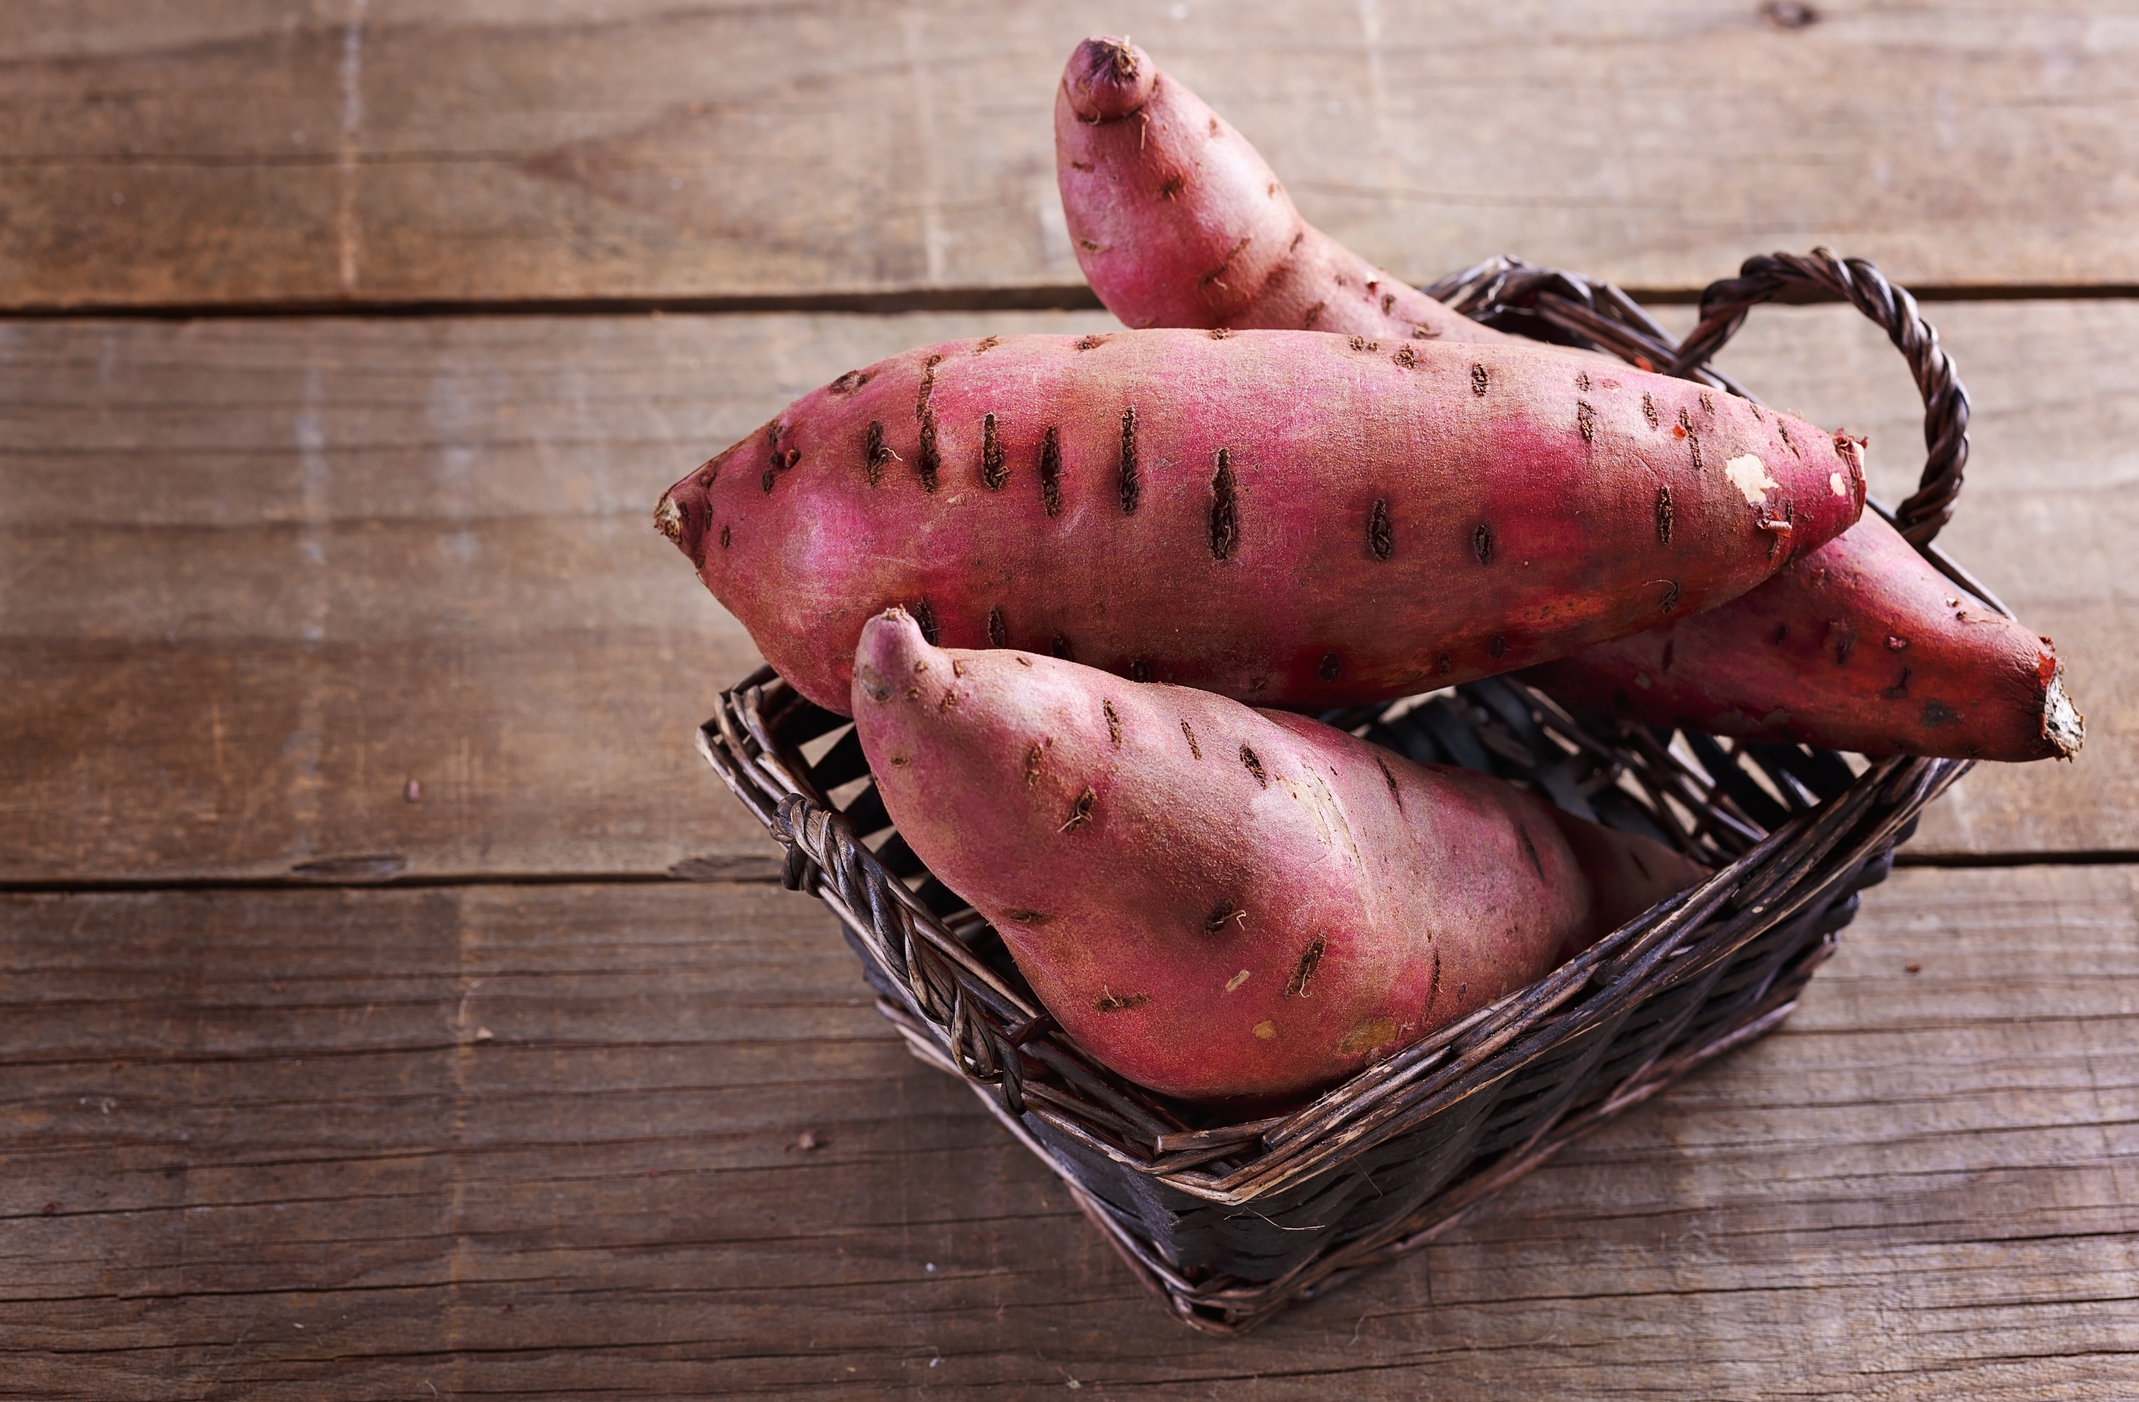 Sweet potato over rustic wooden background